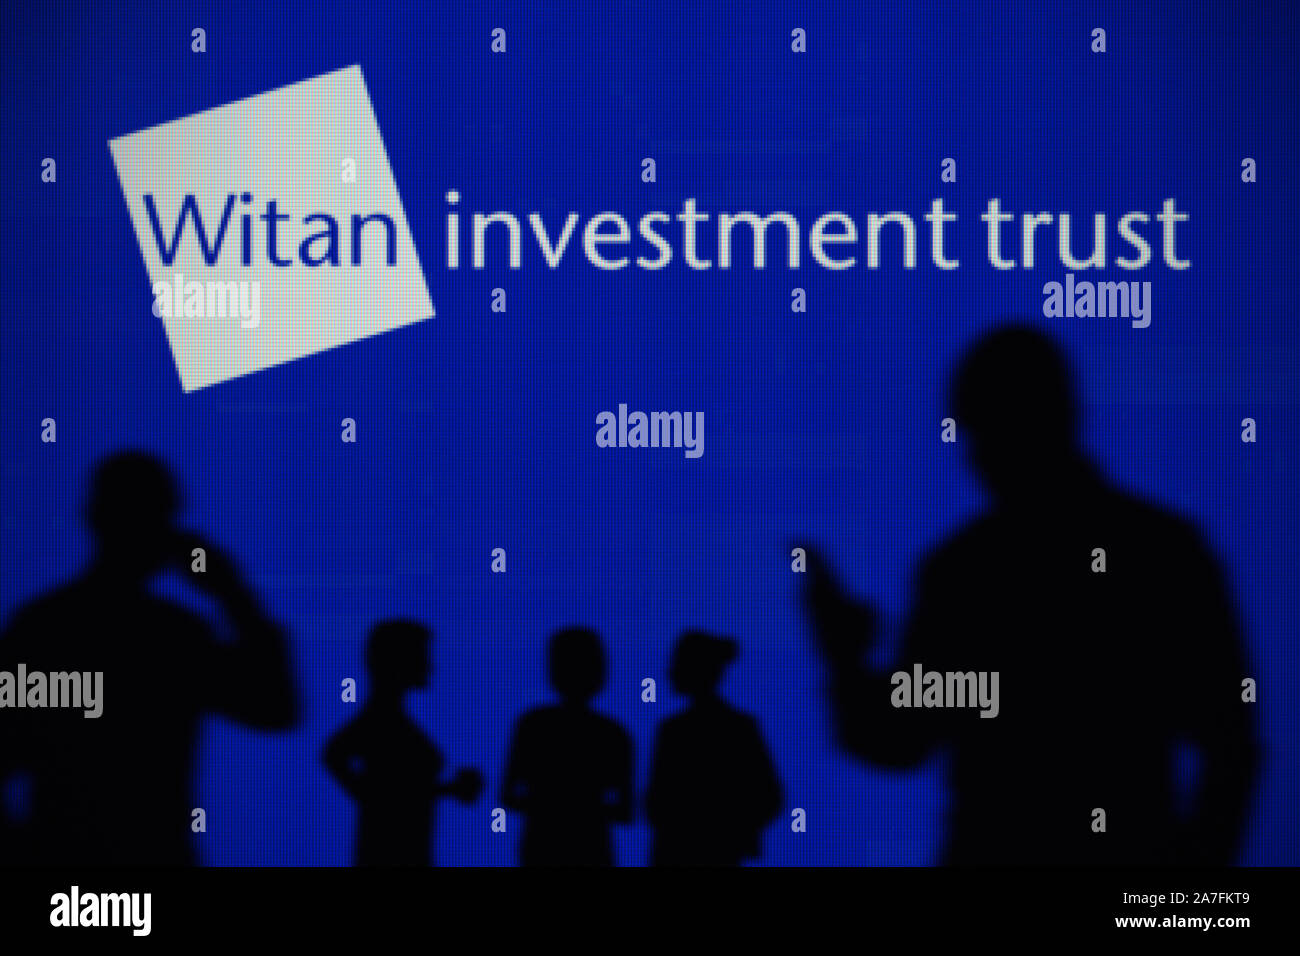 The Witan Investment Trust logo is seen on an LED screen in the background while a silhouetted person uses a smartphone (Editorial use only) Stock Photo